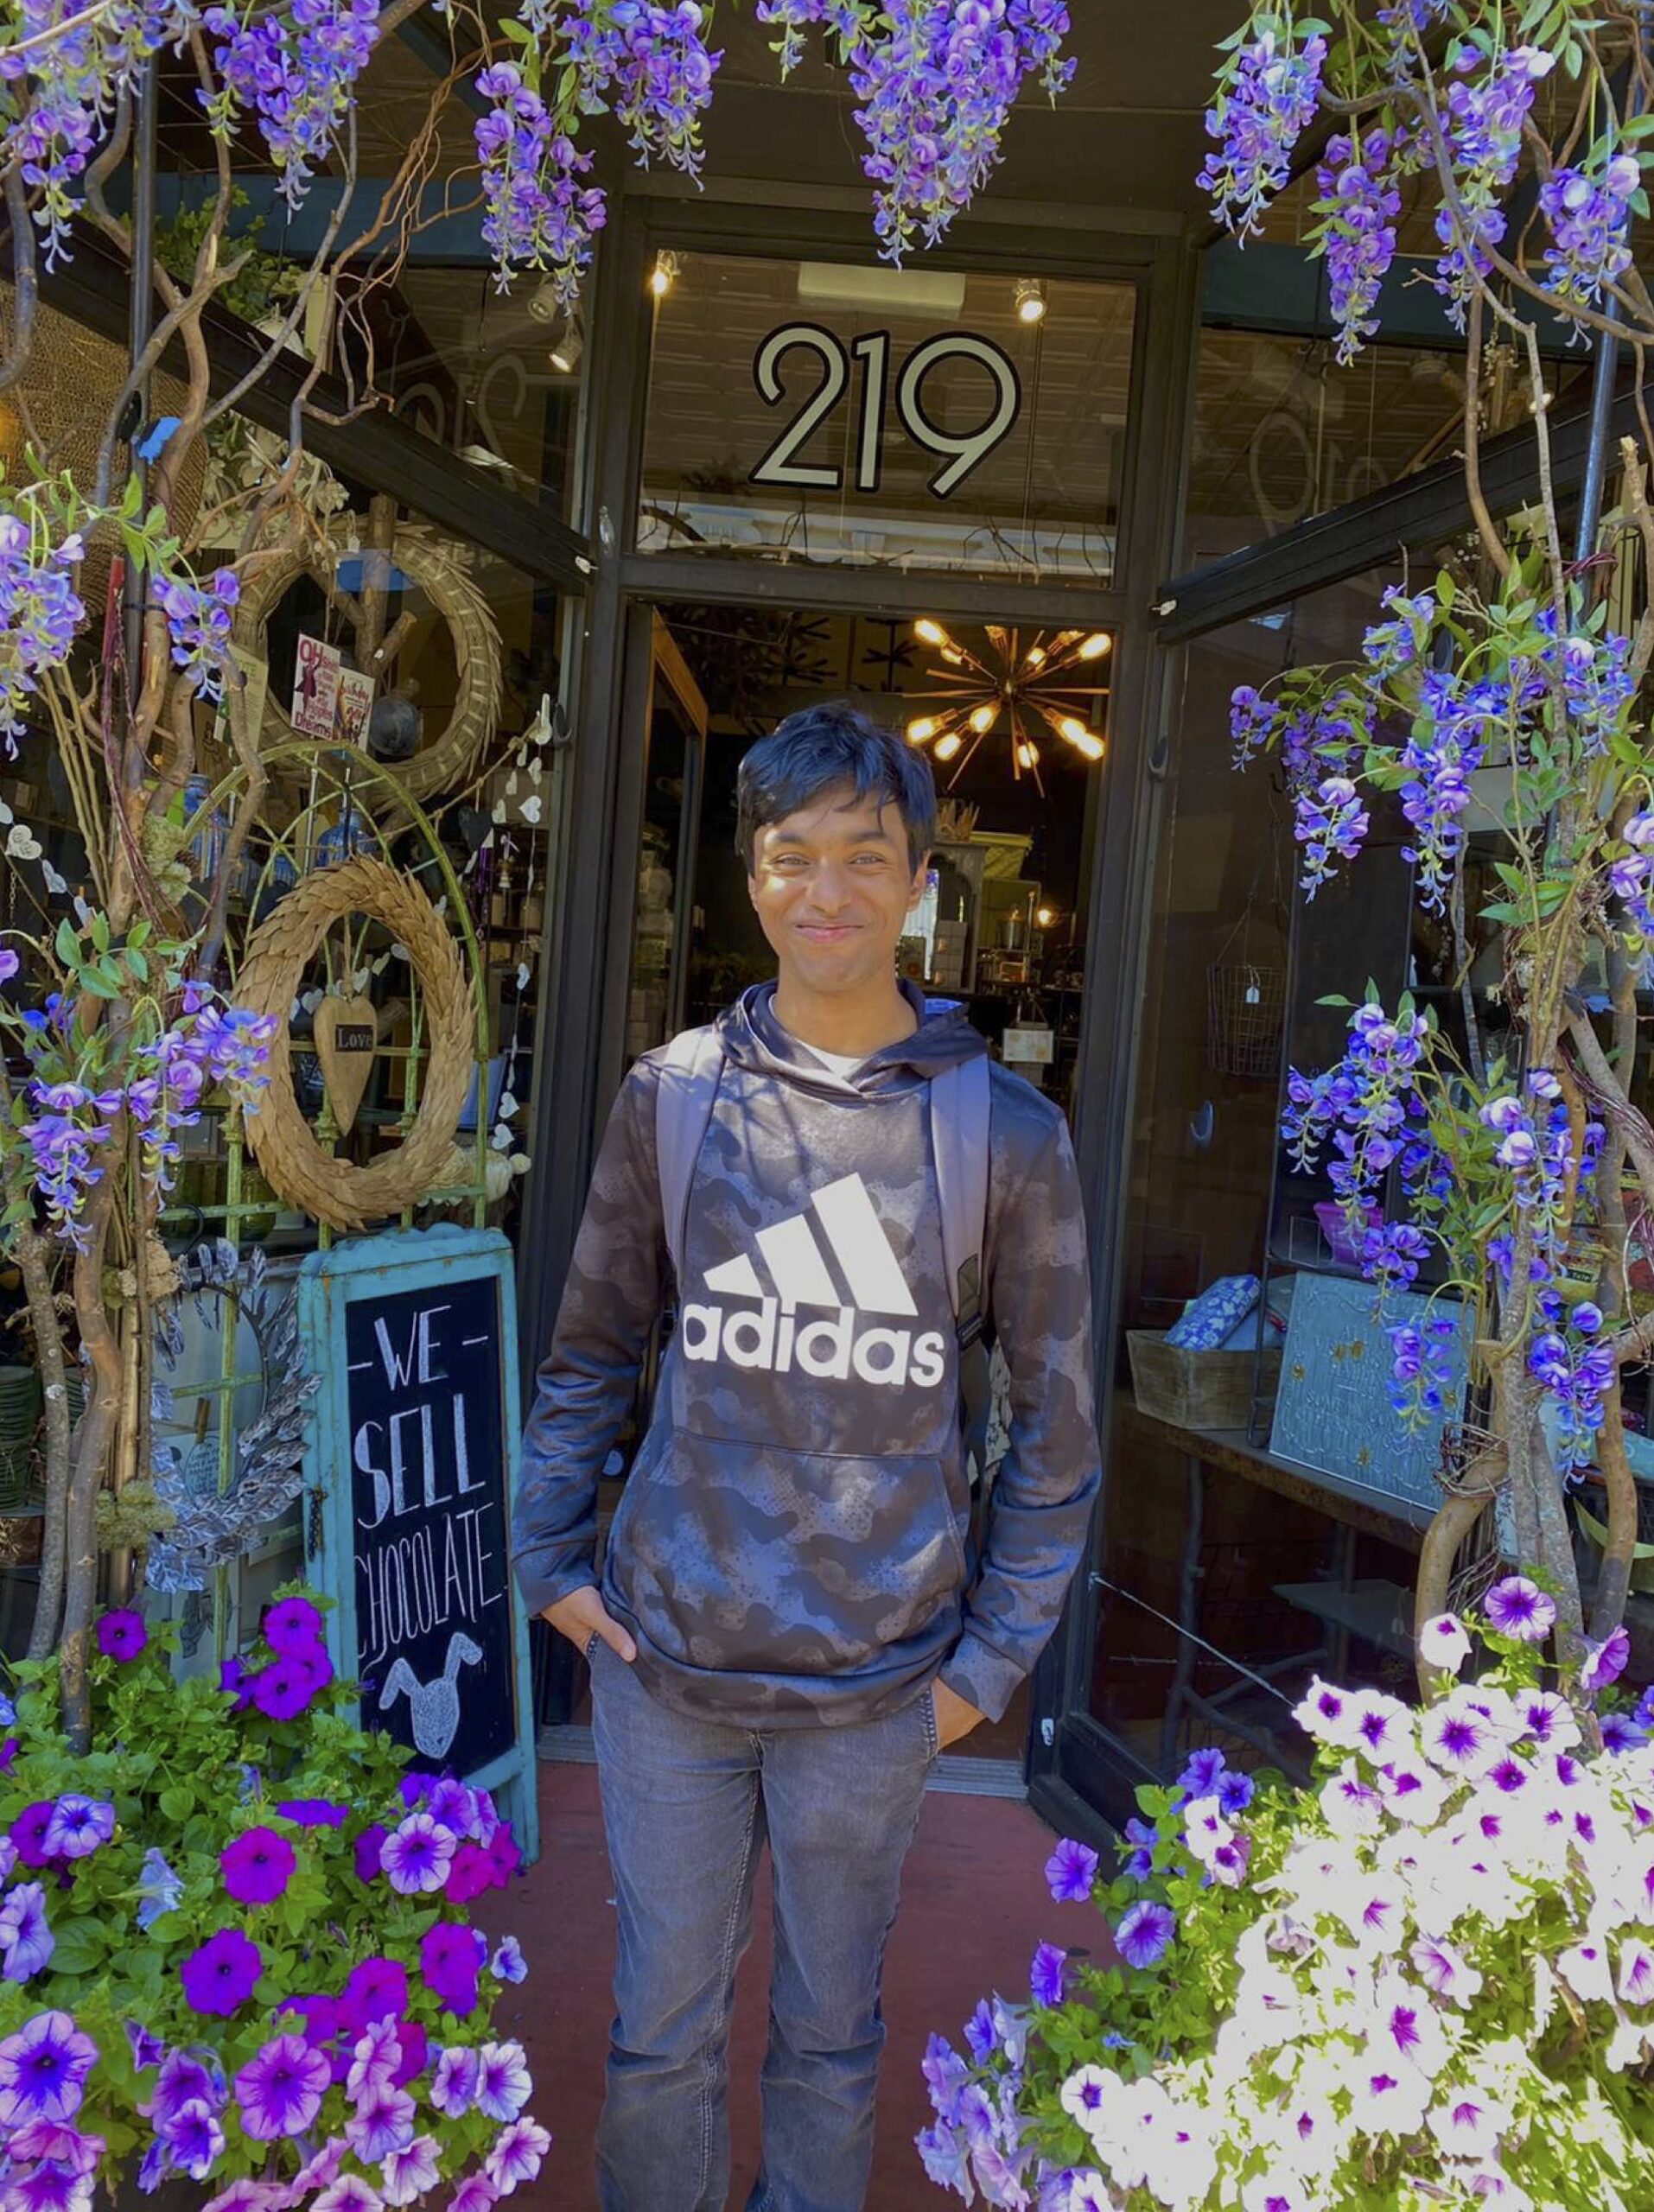 NYU student Armaan Gupta stands in front of a flower-filled storefront that sells chocolates.